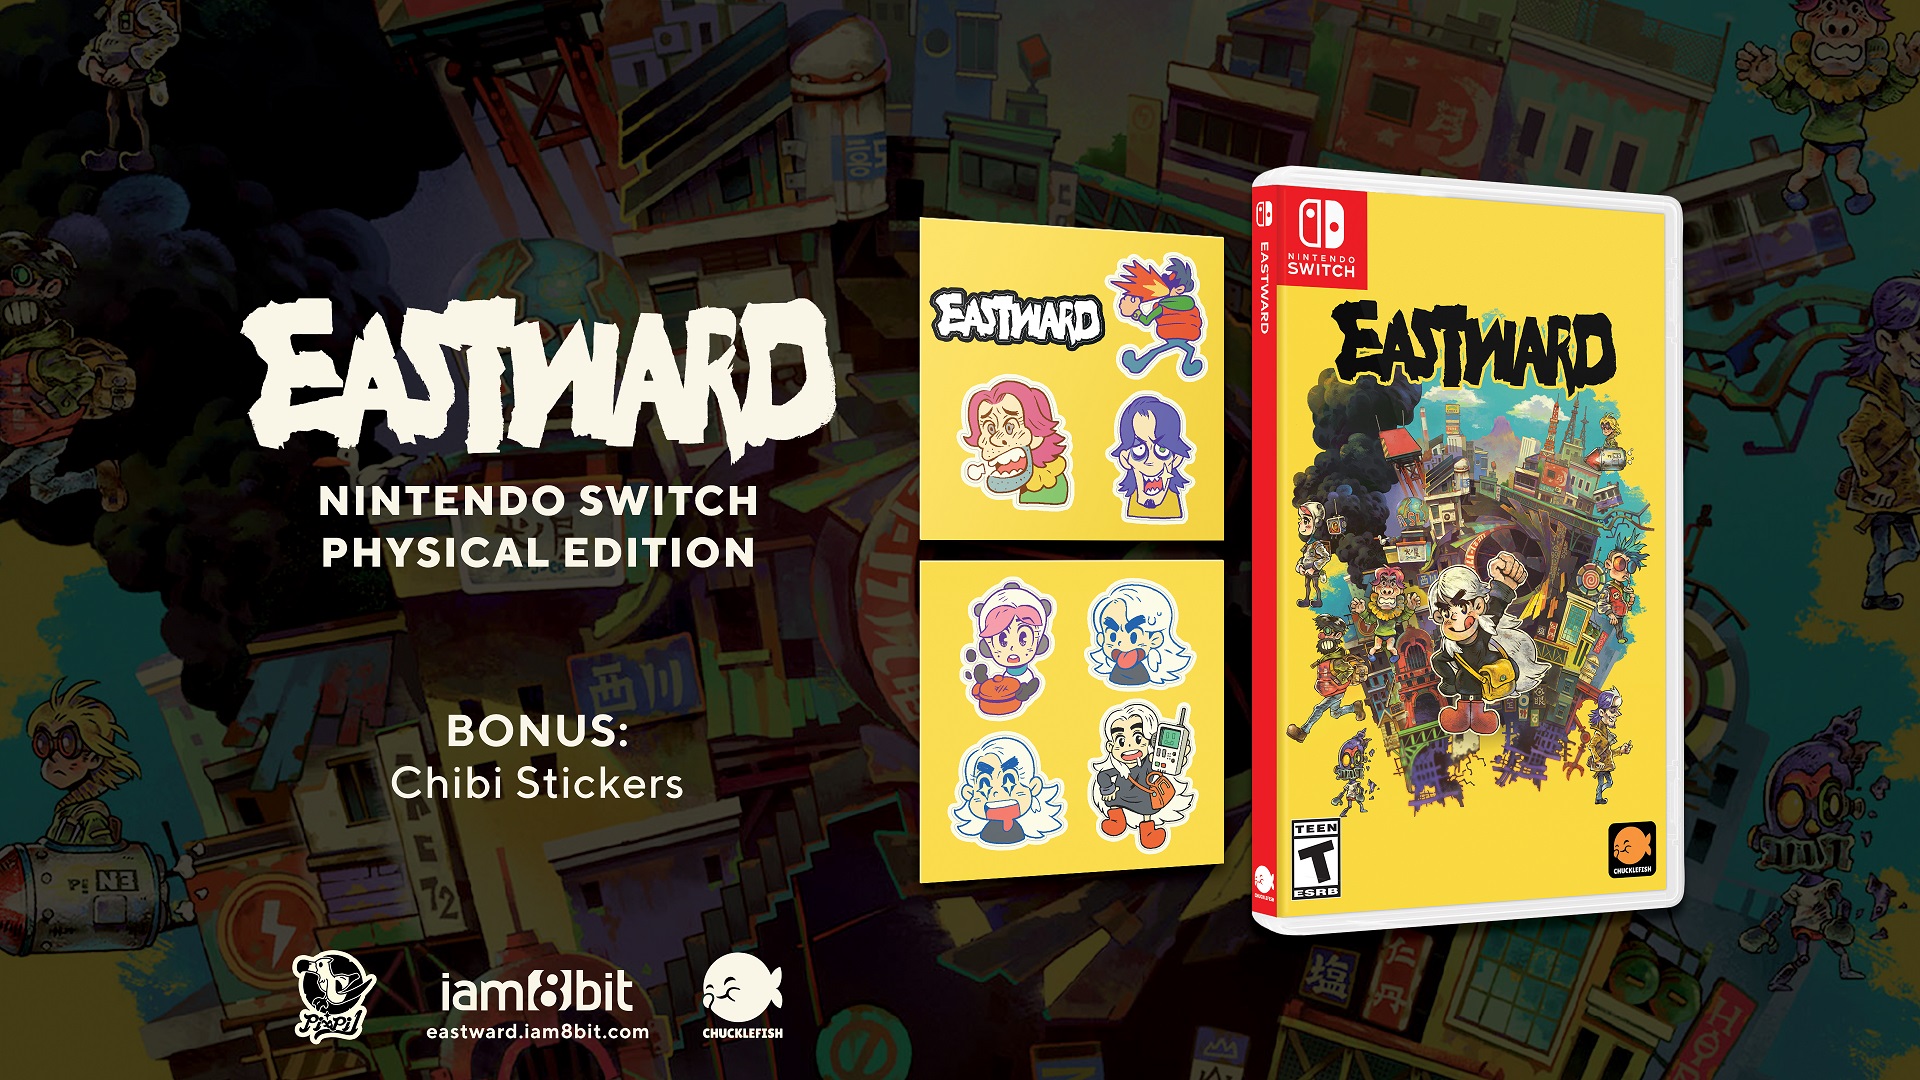 Eastward is getting a physical edition